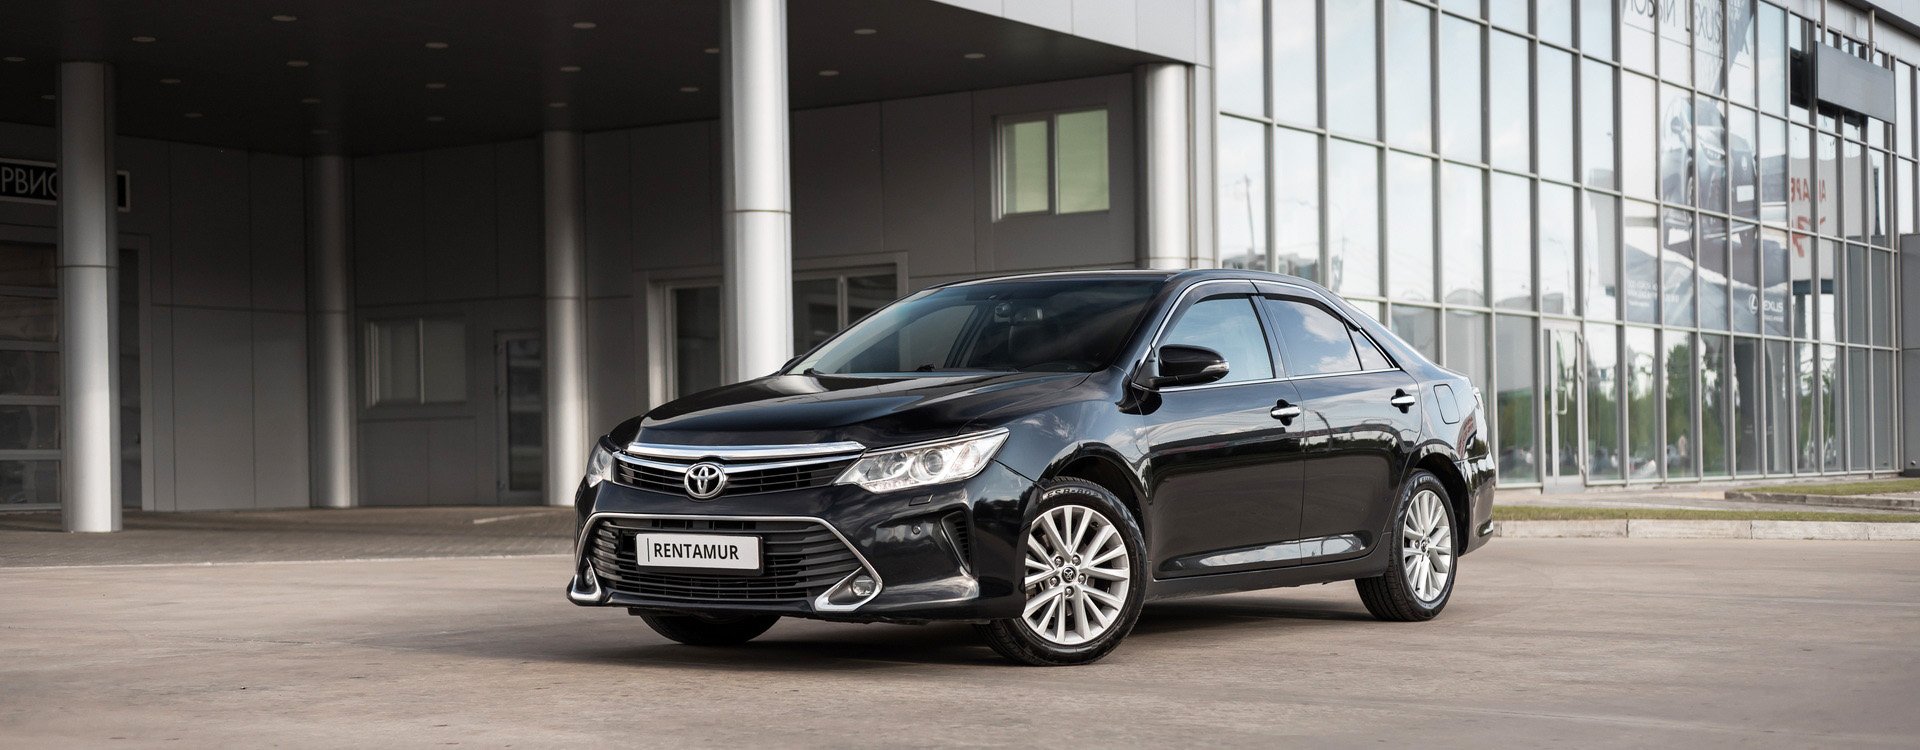 Toyota Camry 2.5 Exclusive